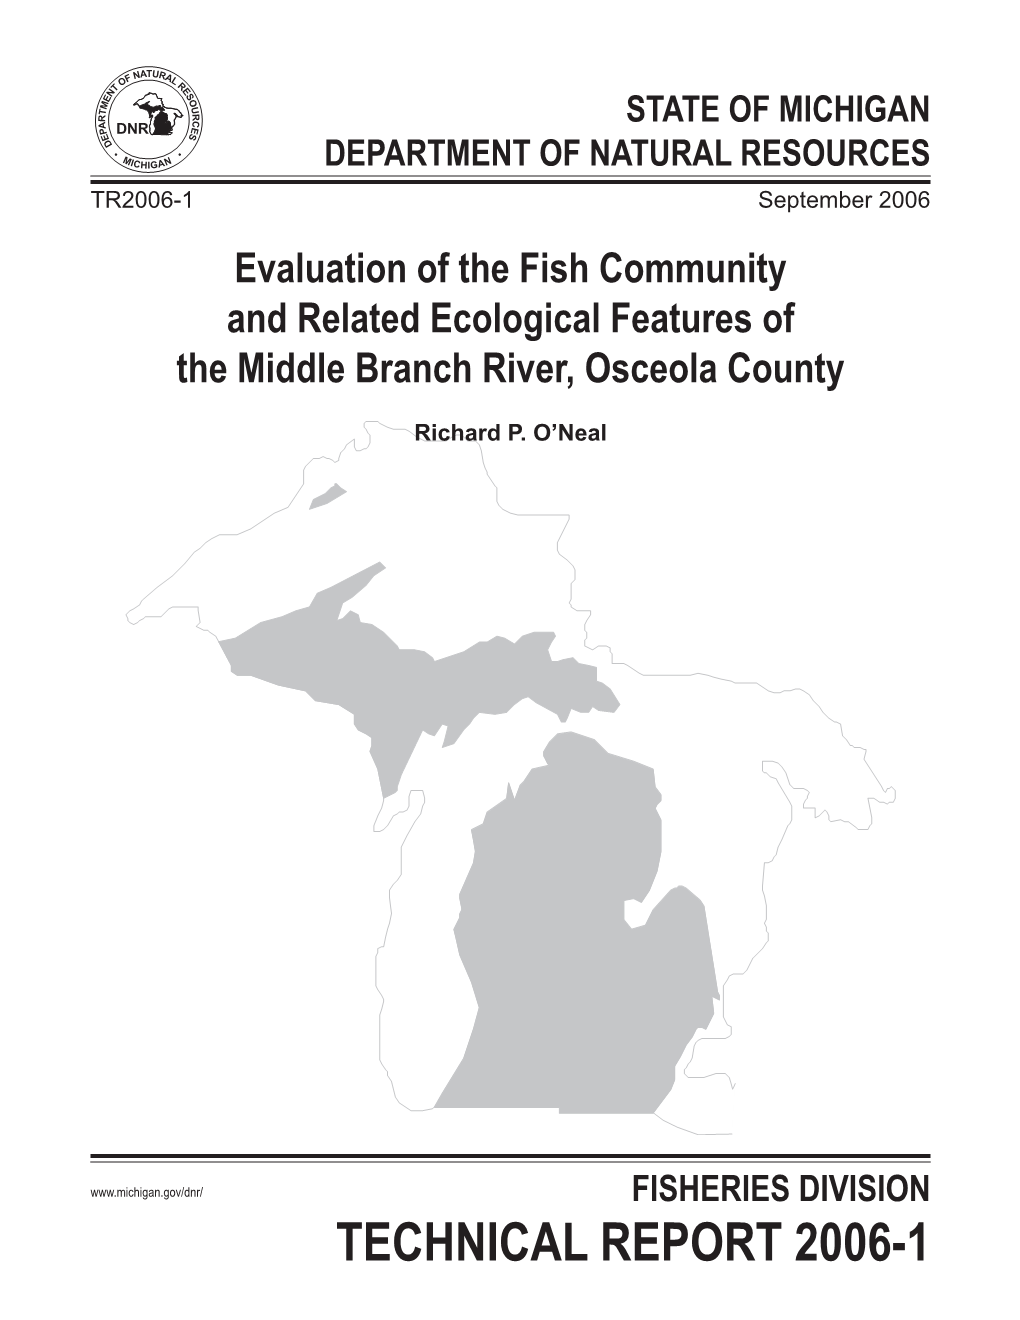 Technical Report 2006-1 Michigan Department of Natural Resources Fisheries Division